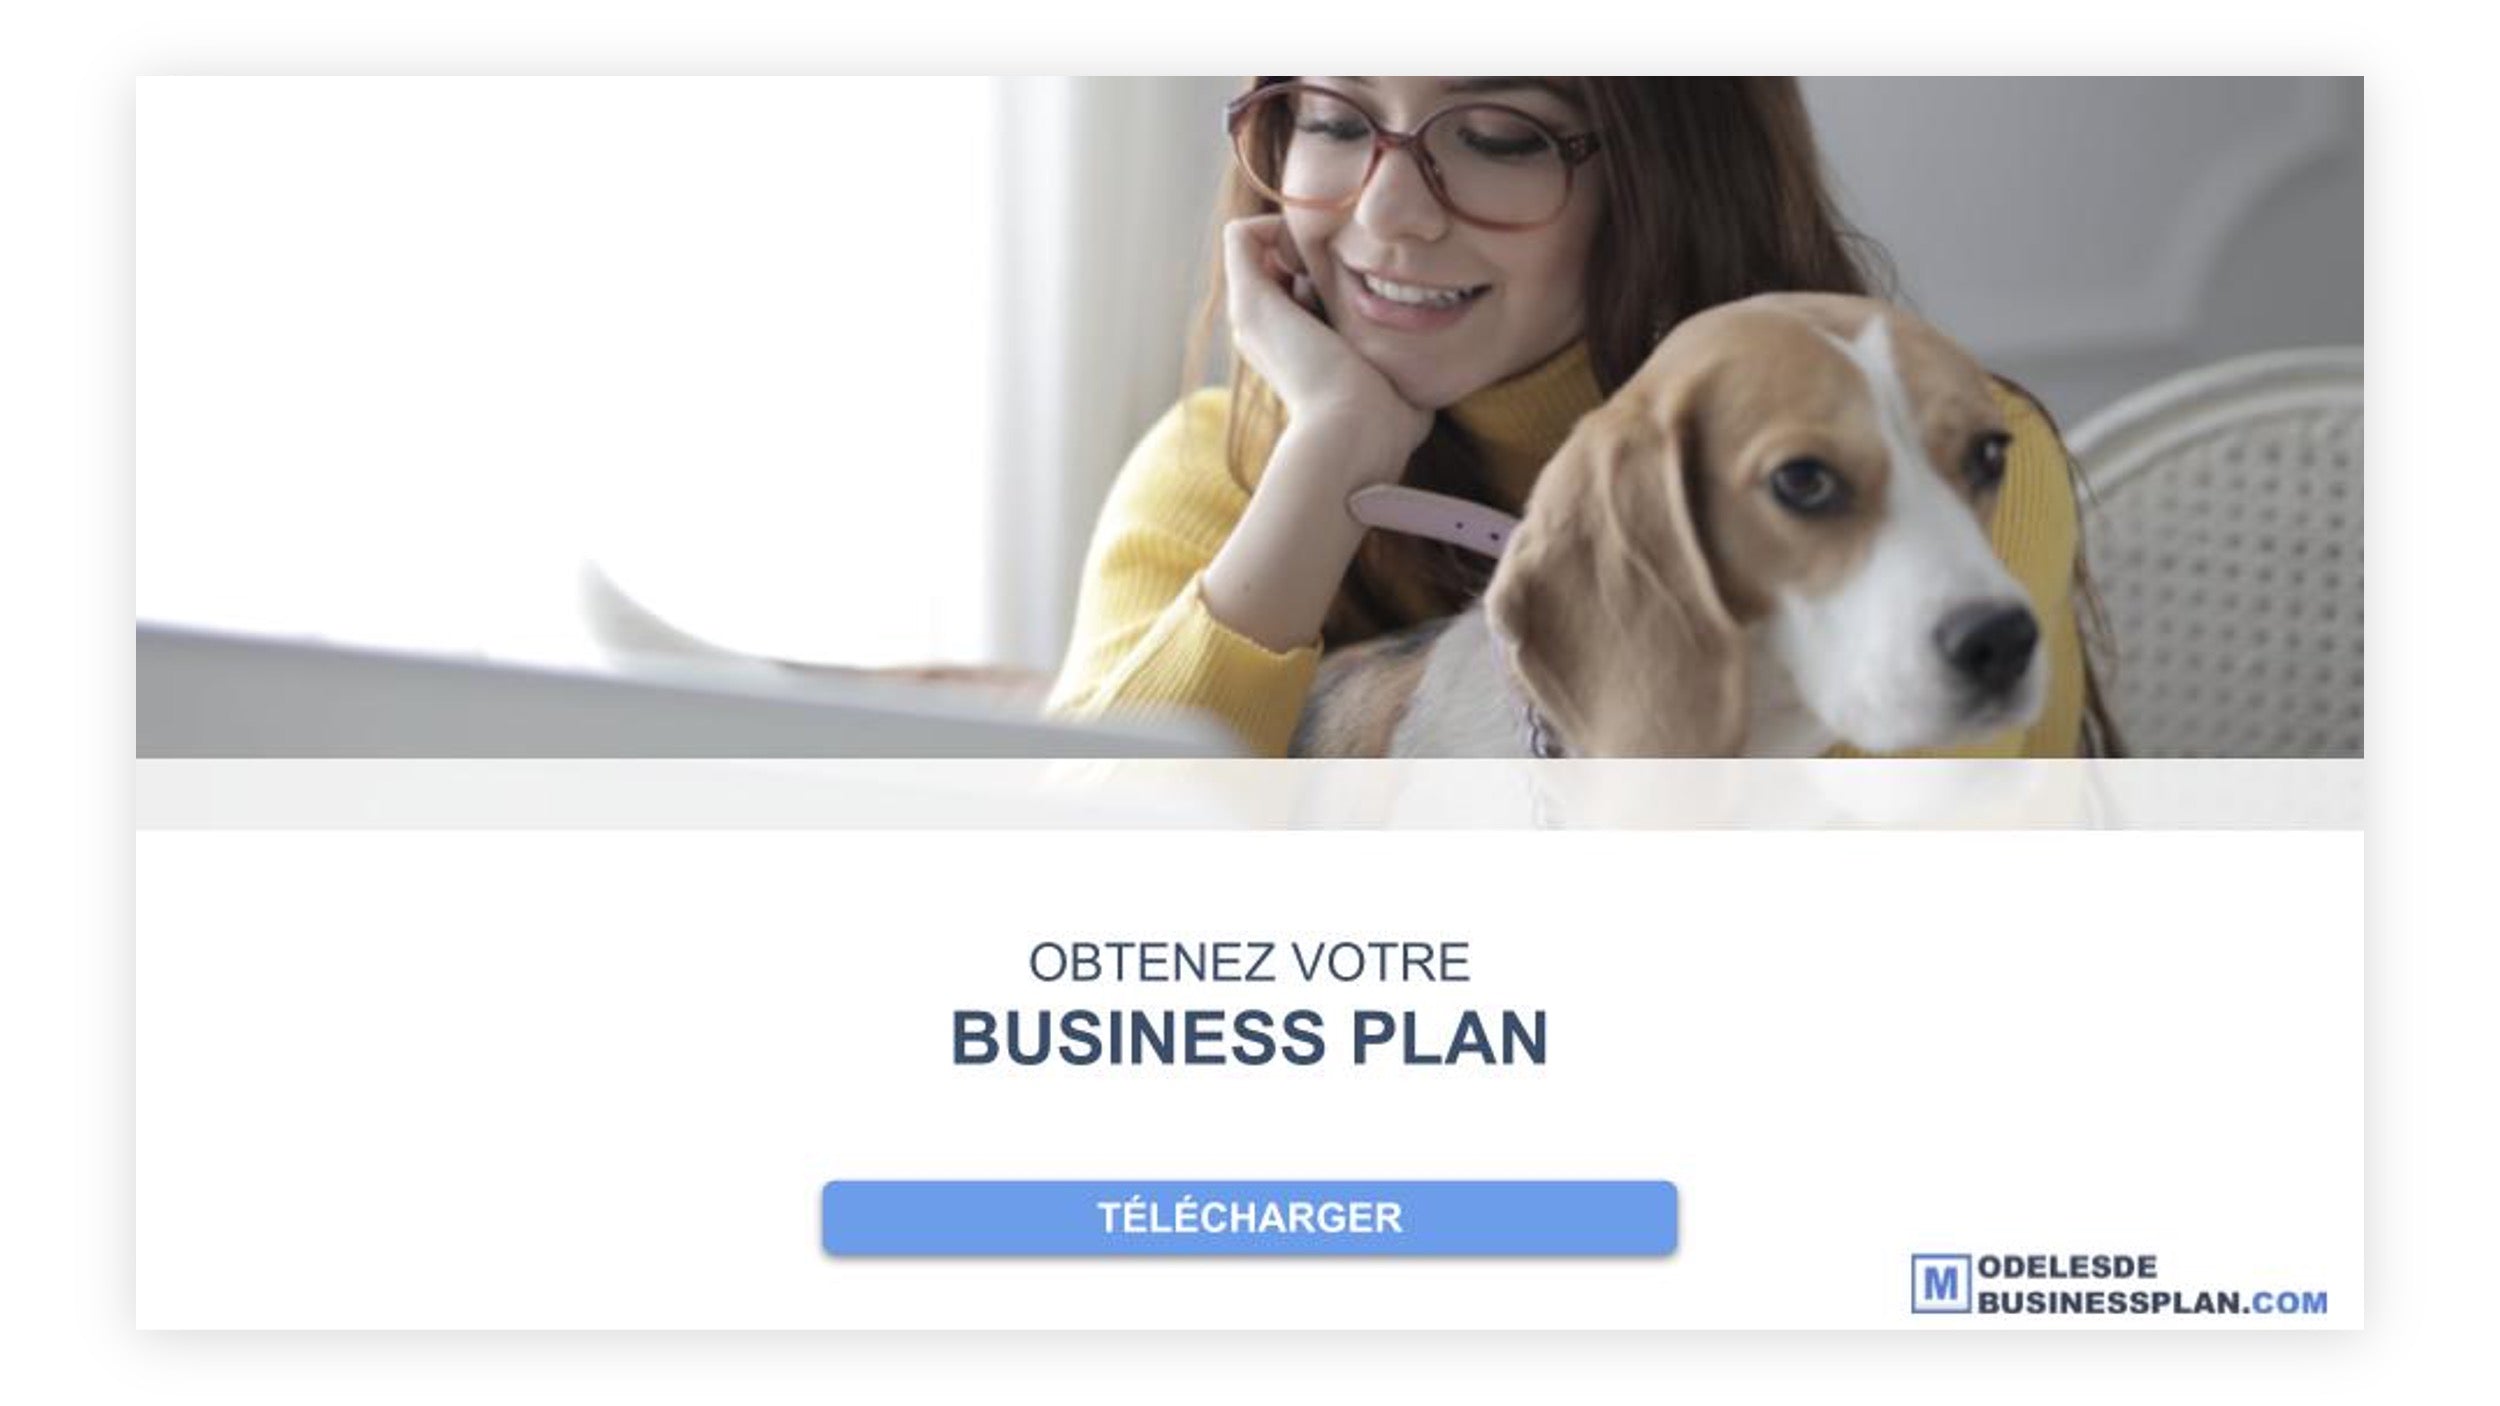 business plan modele exemple